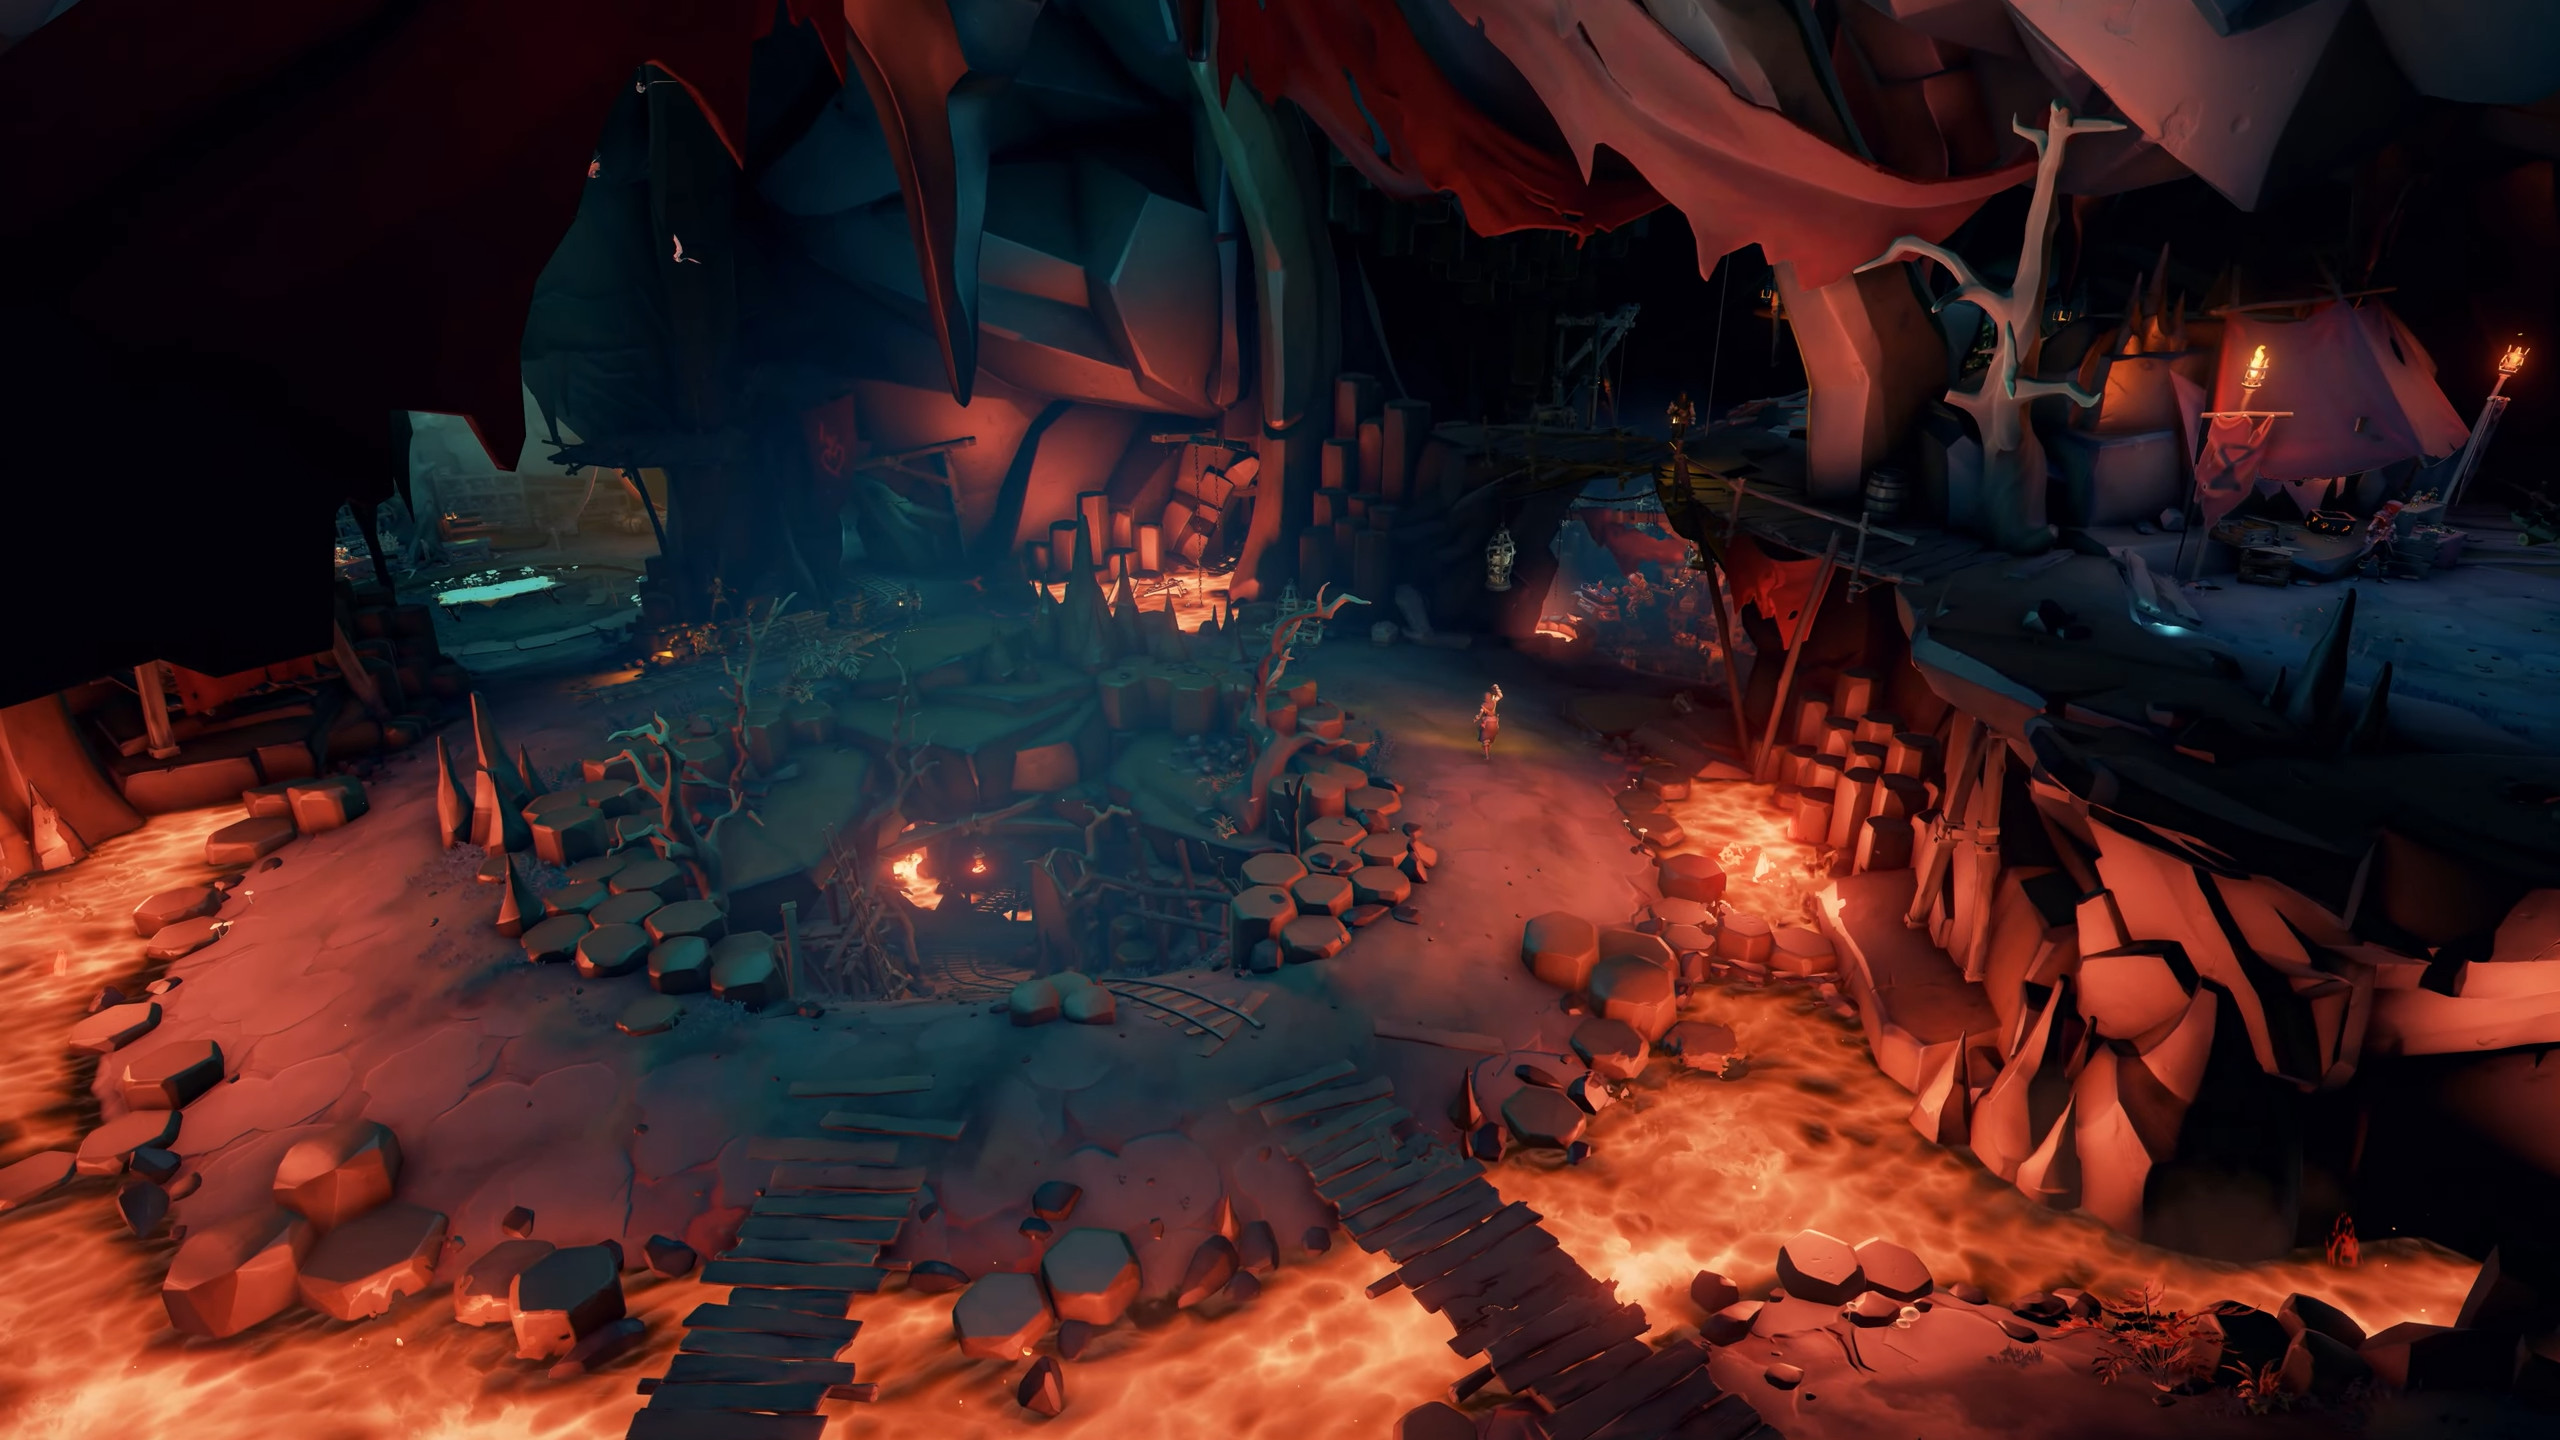 Sea Of Thieves Season 8 Now Live With On Demand PVP, New Locations, And More